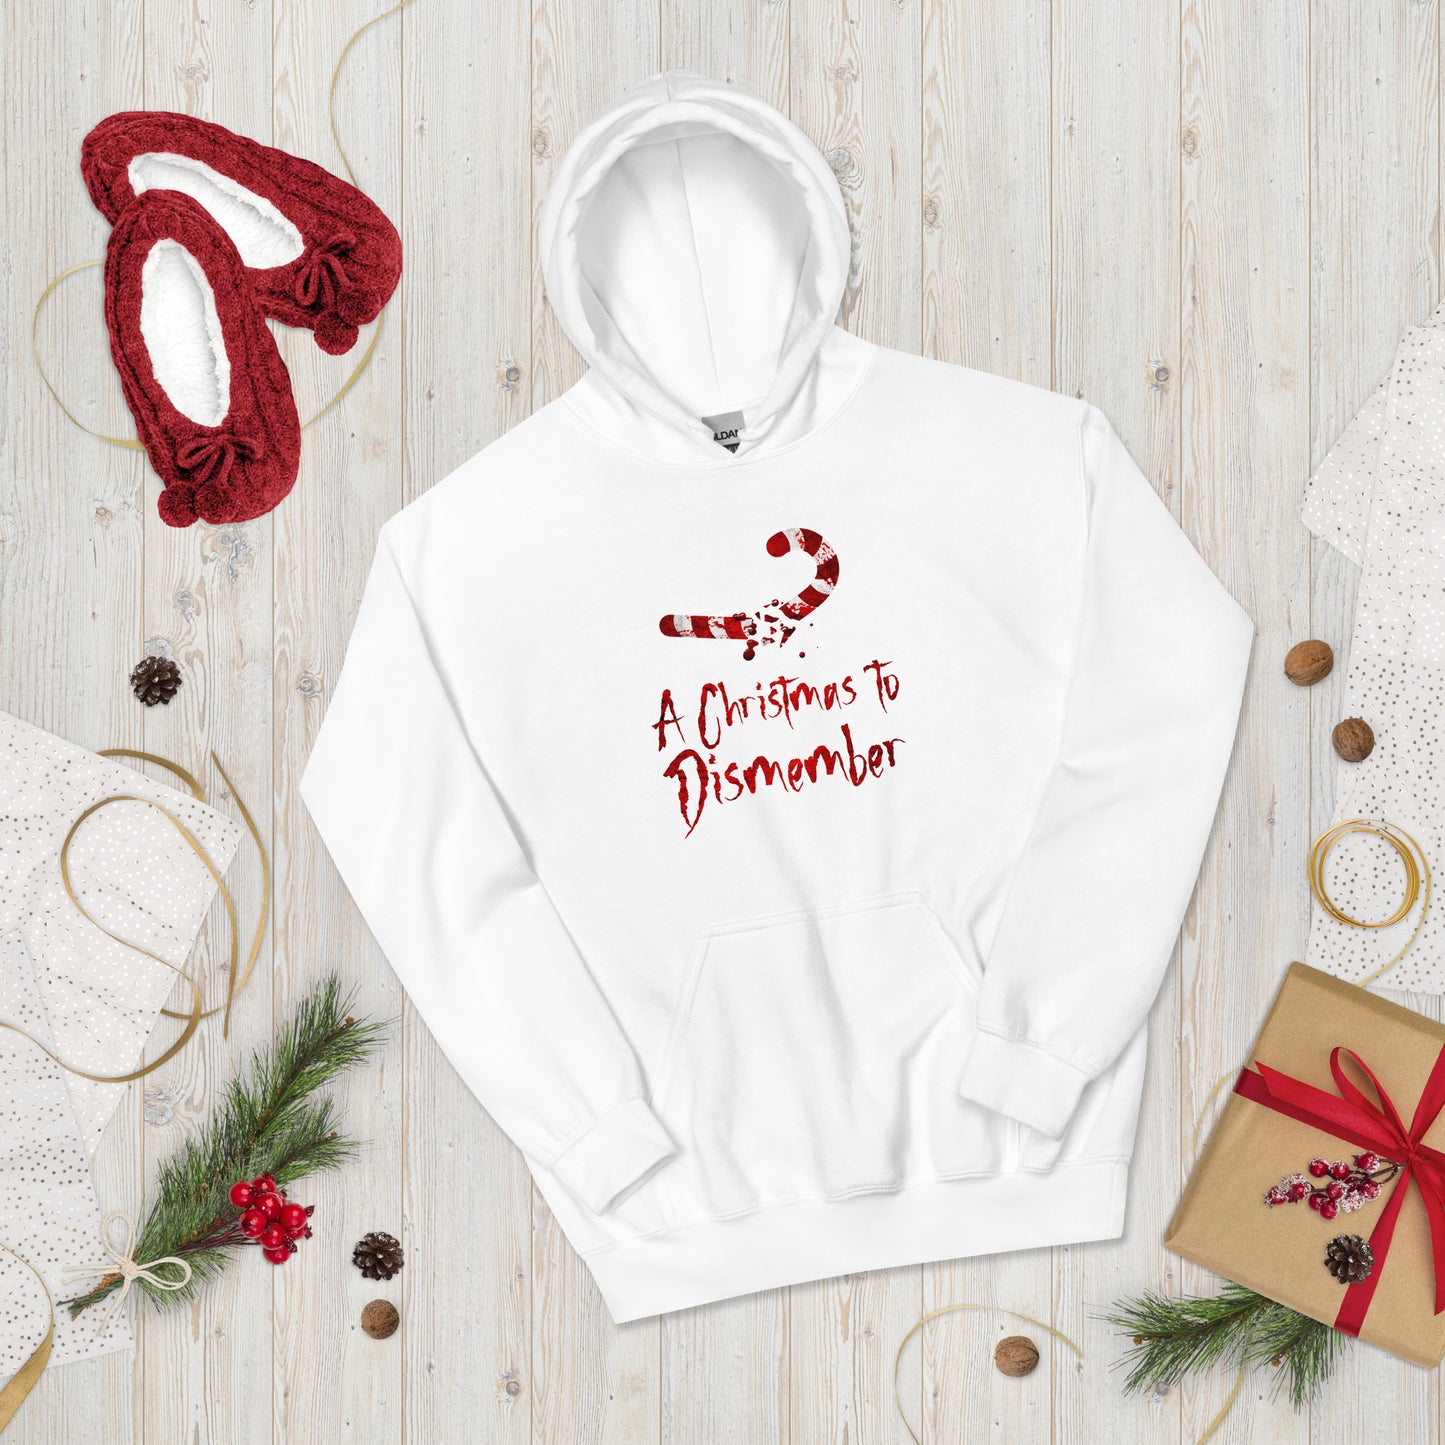 "A Christmas to Dismember" Unisex Hoodie